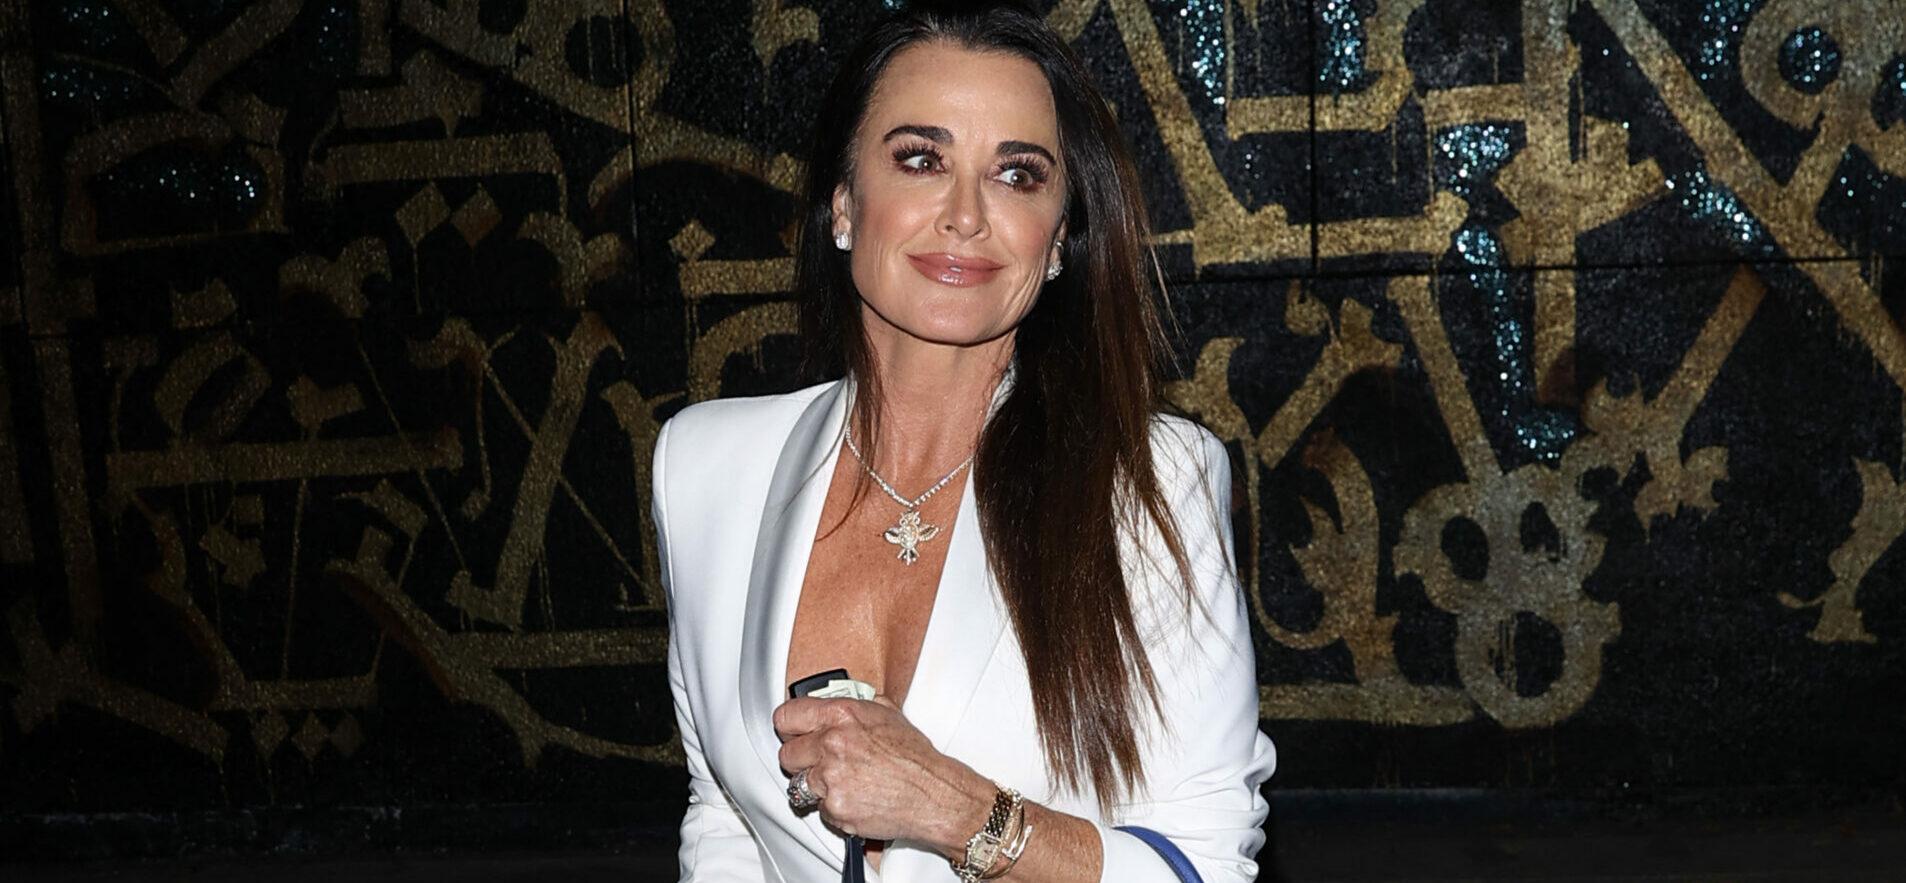 Did Kyle Richards Just Reveal The REAL SECRET Behind Her Drastic Weight Loss?!